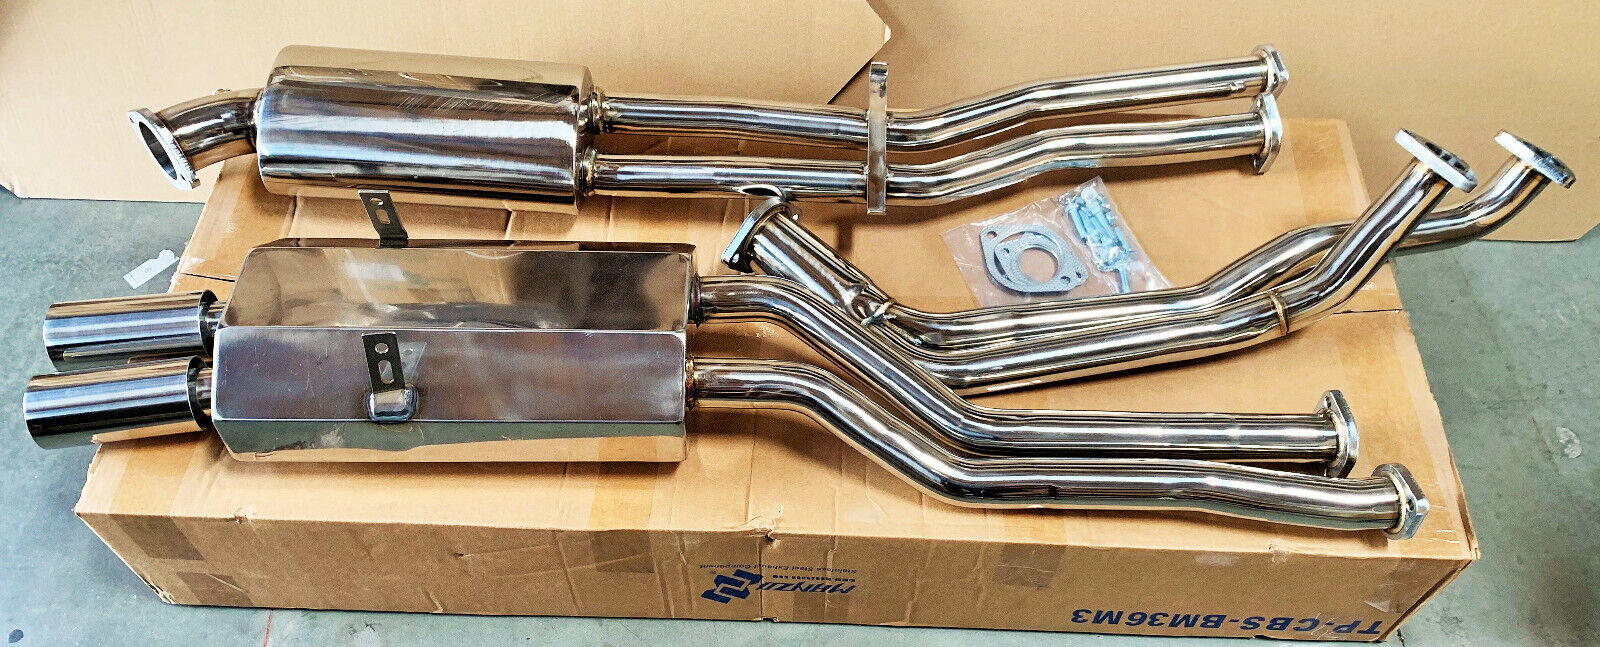 MANZO STAINLESS STEEL CATBACK EXHAUST FOR E36 M3 1992-1998 3.0L I6 S50B30